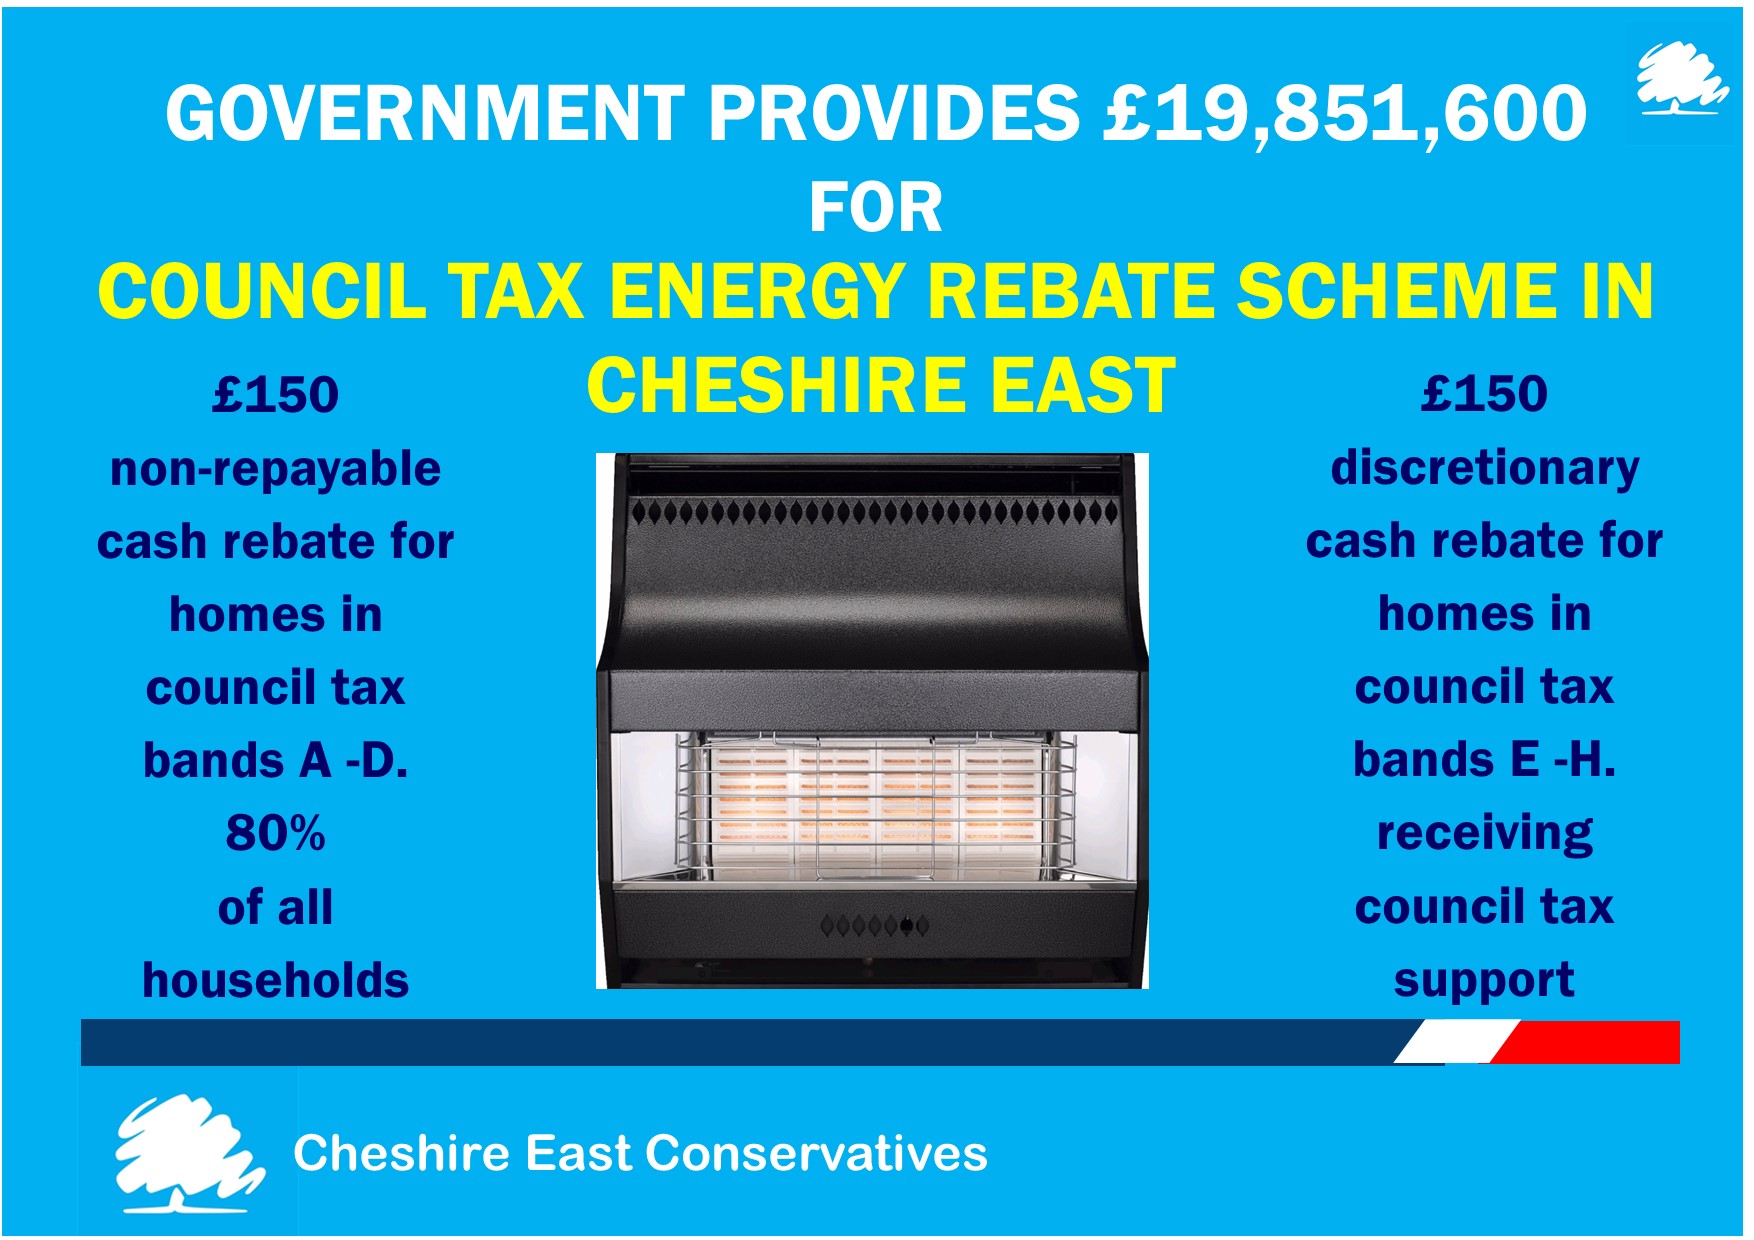 cheshire-east-conservatives-welcome-nearly-20m-for-council-tax-rebate